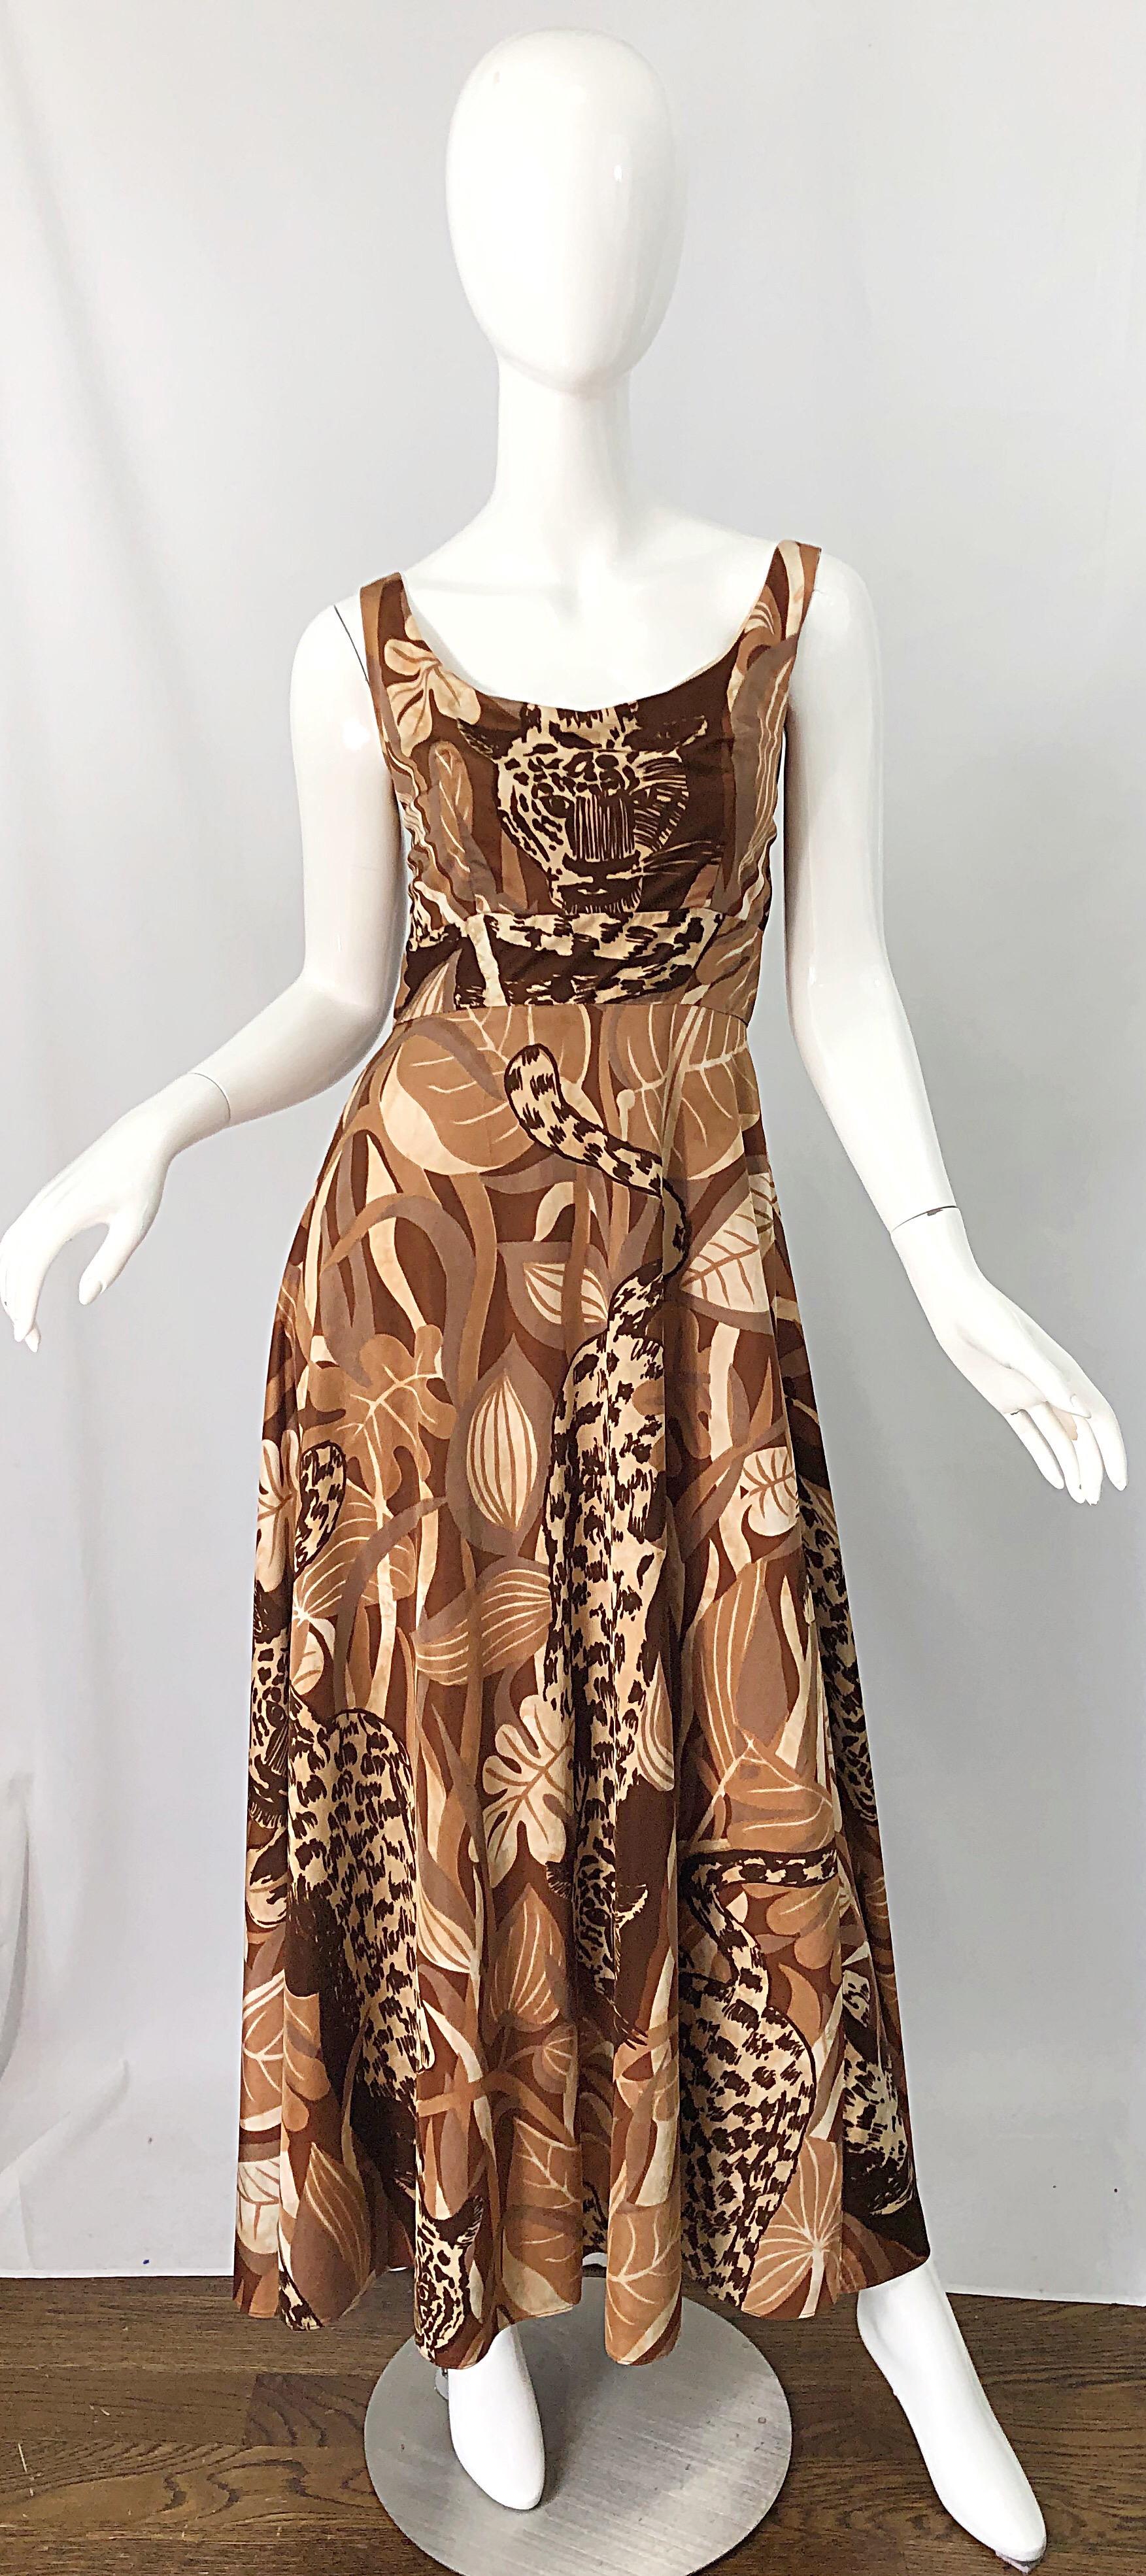 Channel your inner Joe Exotic from Tiger King in this 1970s FUTURA COUTURE leopard print sleeveless leopard print jersey maxi dress! Features leopard prints throughout in brown, ivory, white, terra cotta, and tan throughout. Tailored bodice with a